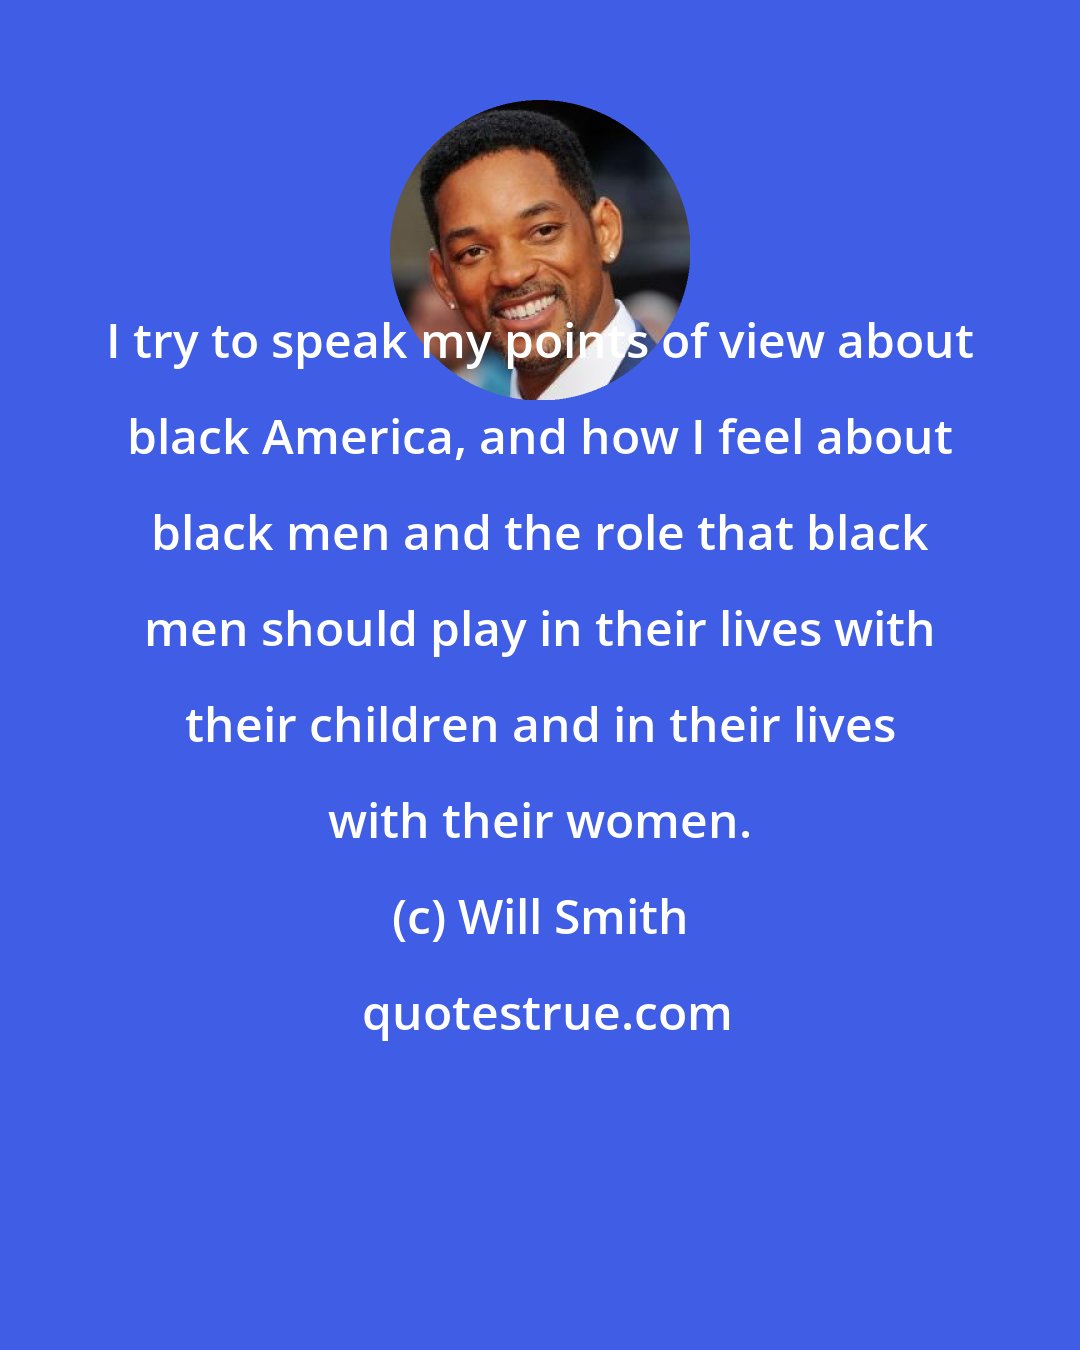 Will Smith: I try to speak my points of view about black America, and how I feel about black men and the role that black men should play in their lives with their children and in their lives with their women.